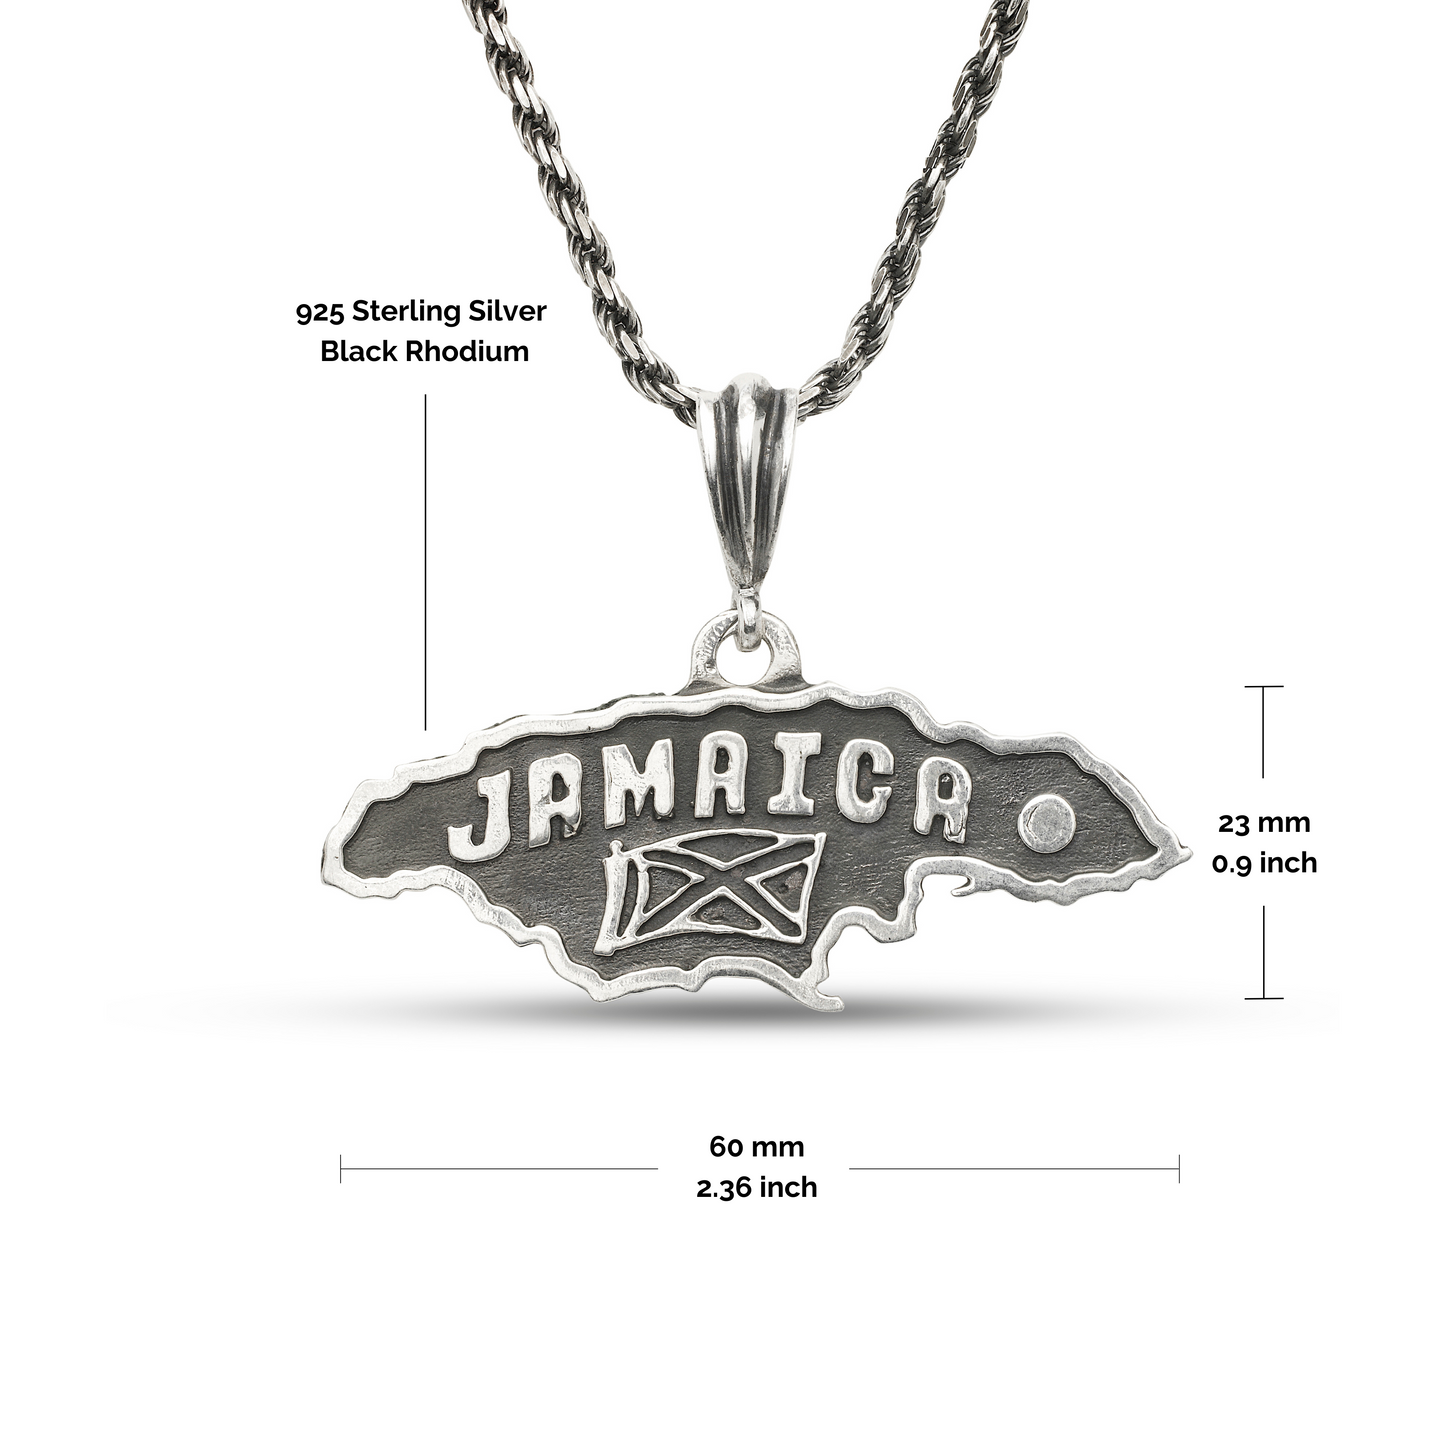 Better Jewelry .925 Sterling Silver Black Oxidised Jamaica Map Pendant Necklace w. Rope chain